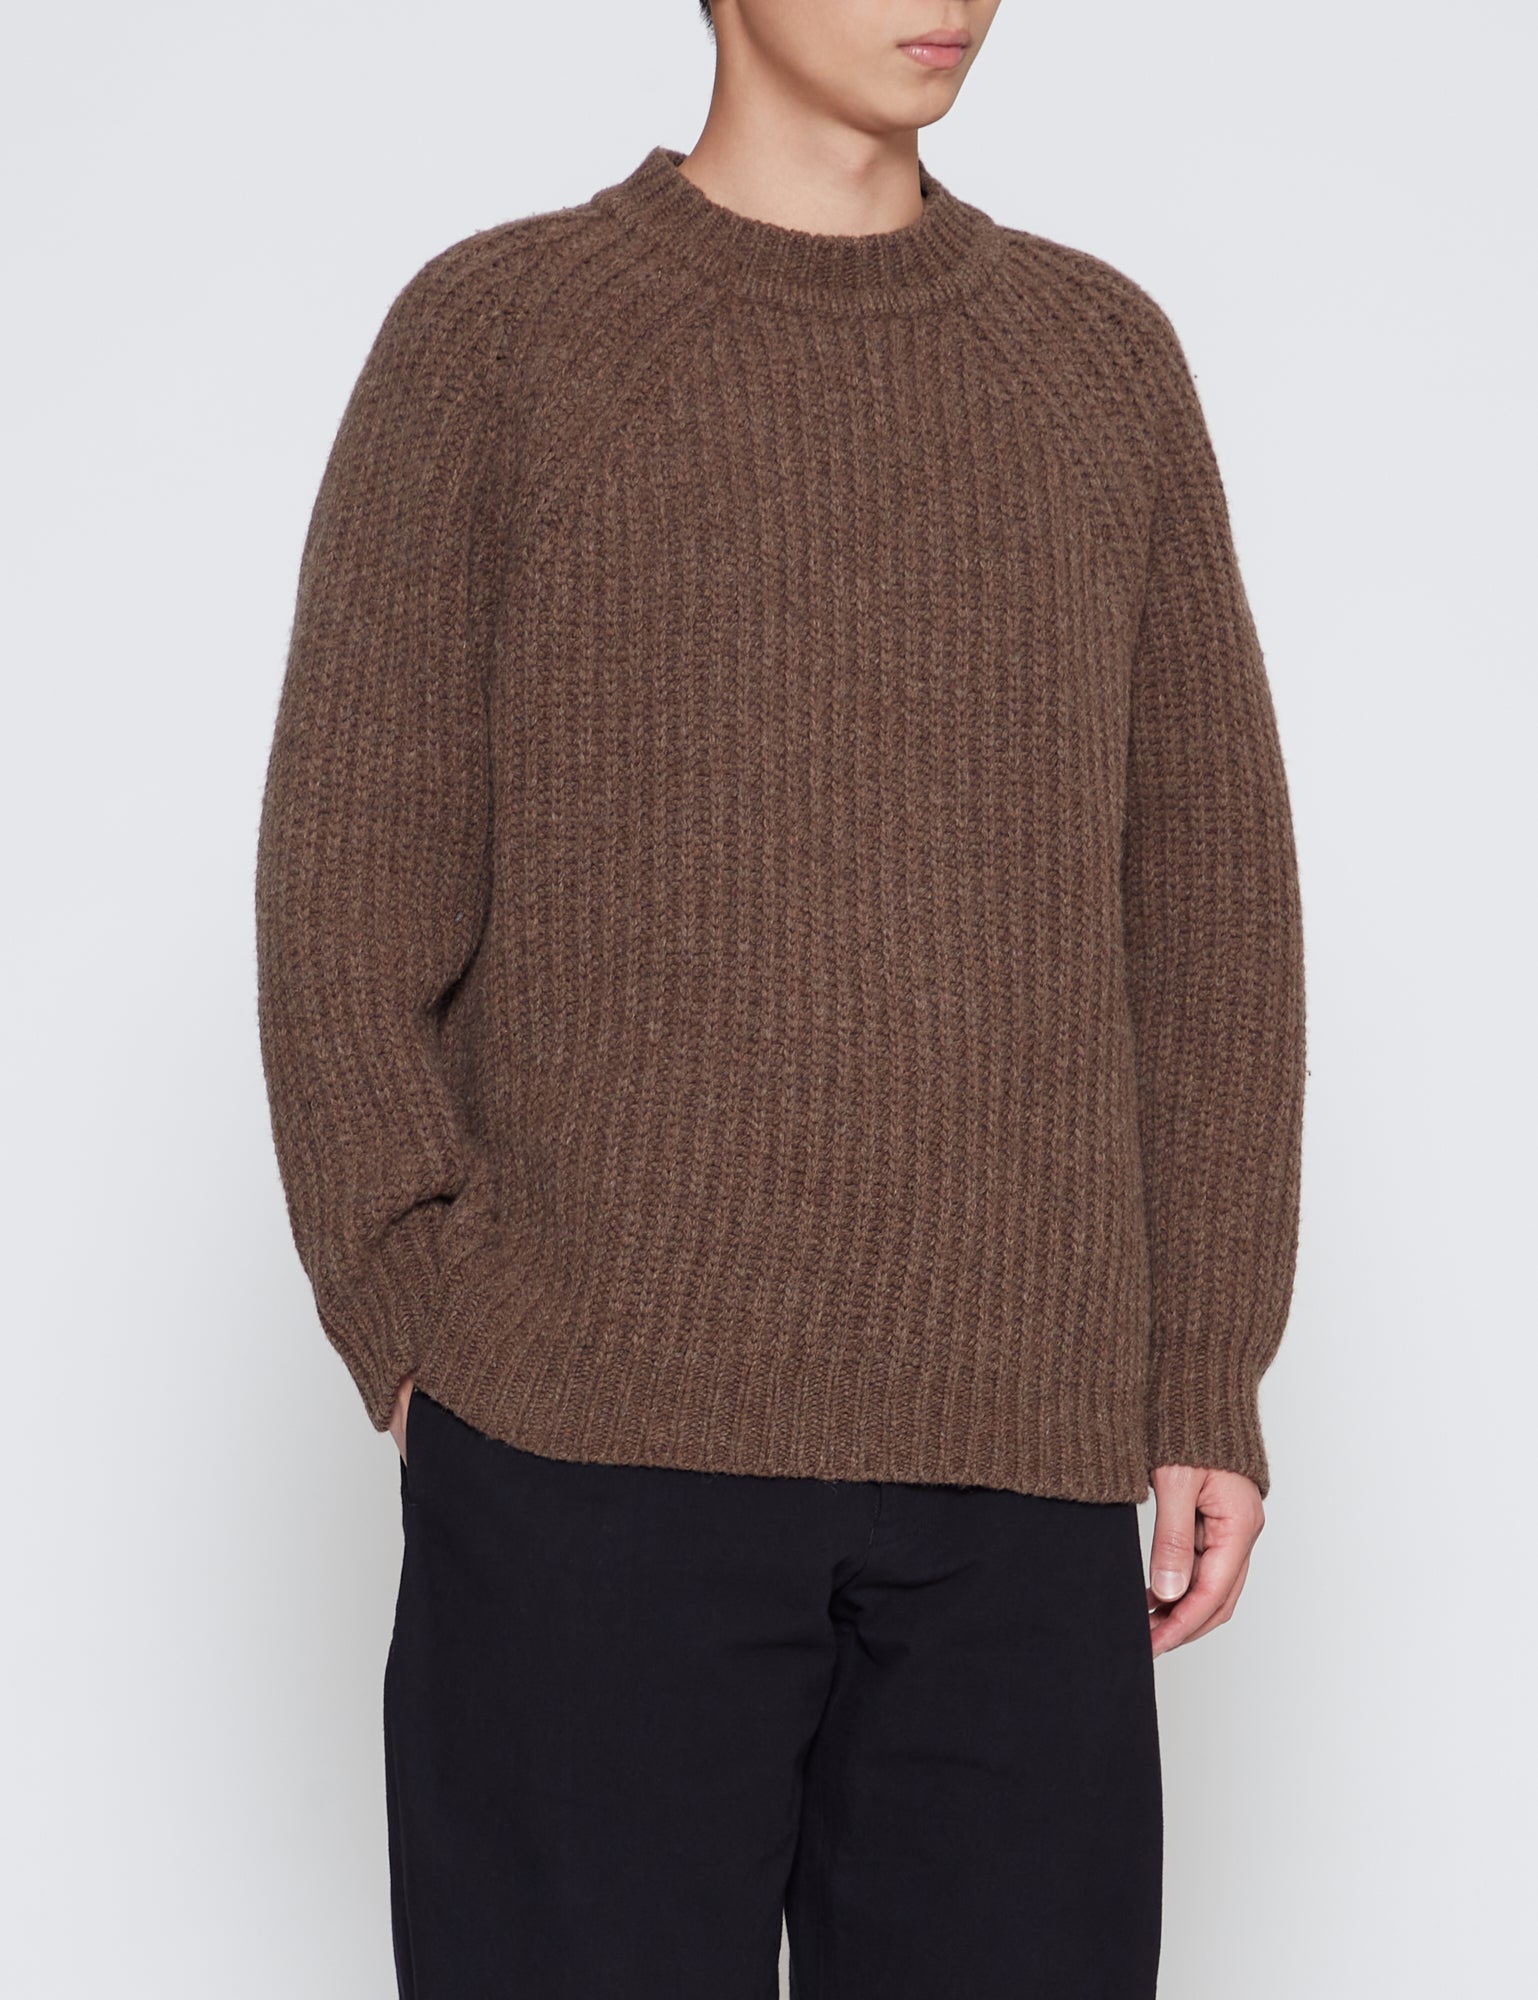 O PROJECT BROWN KNIT CREWNECK SWEATER – GRAPH LAYER